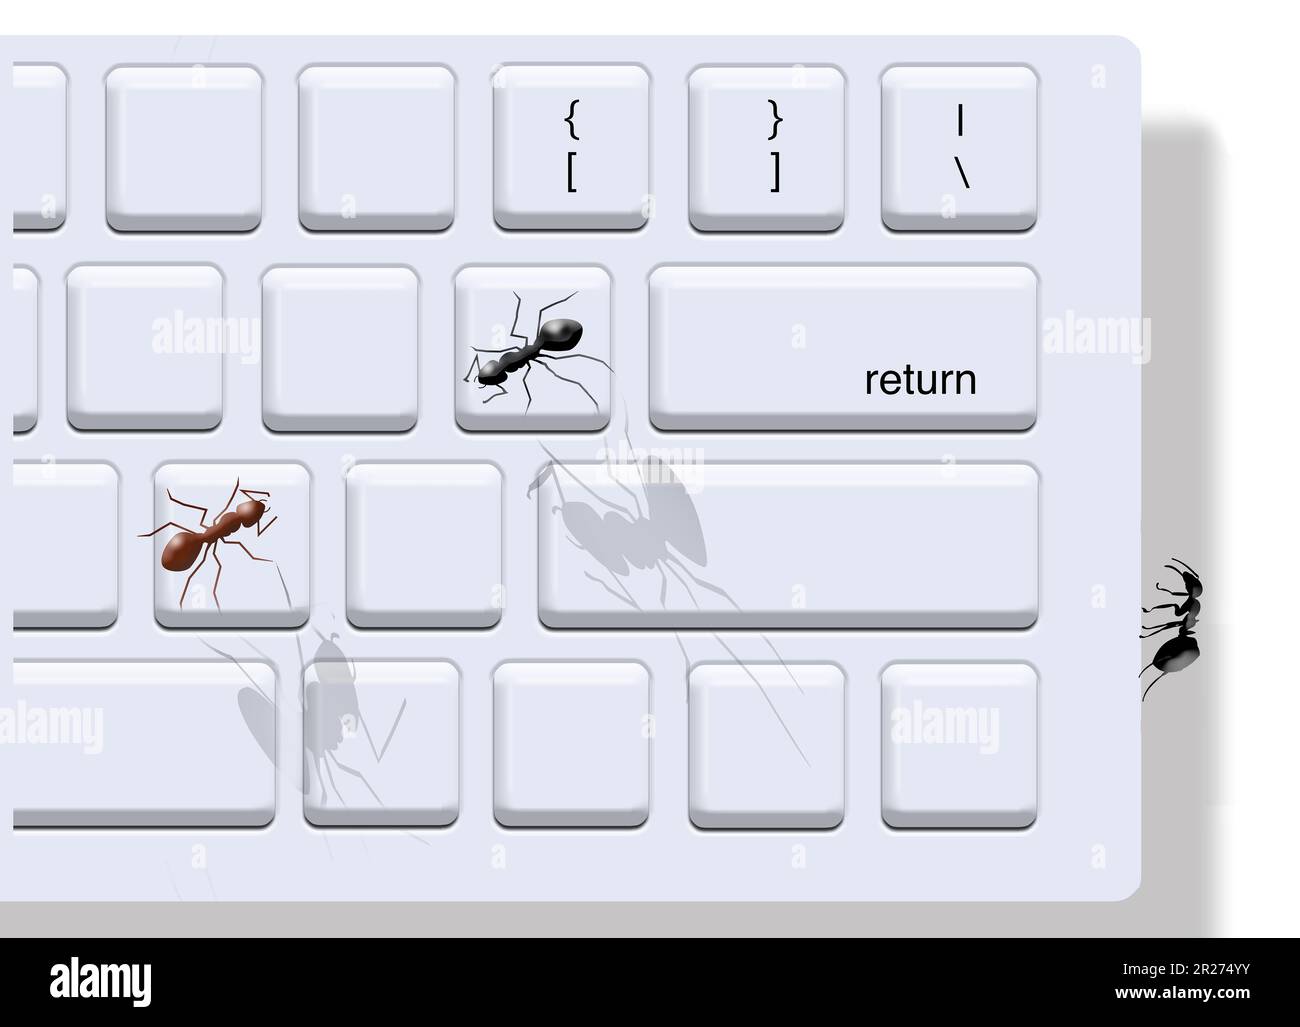 Office ants invade a computer keyboard in a 3-d illustraton about insect pest control and extermination. Stock Photo